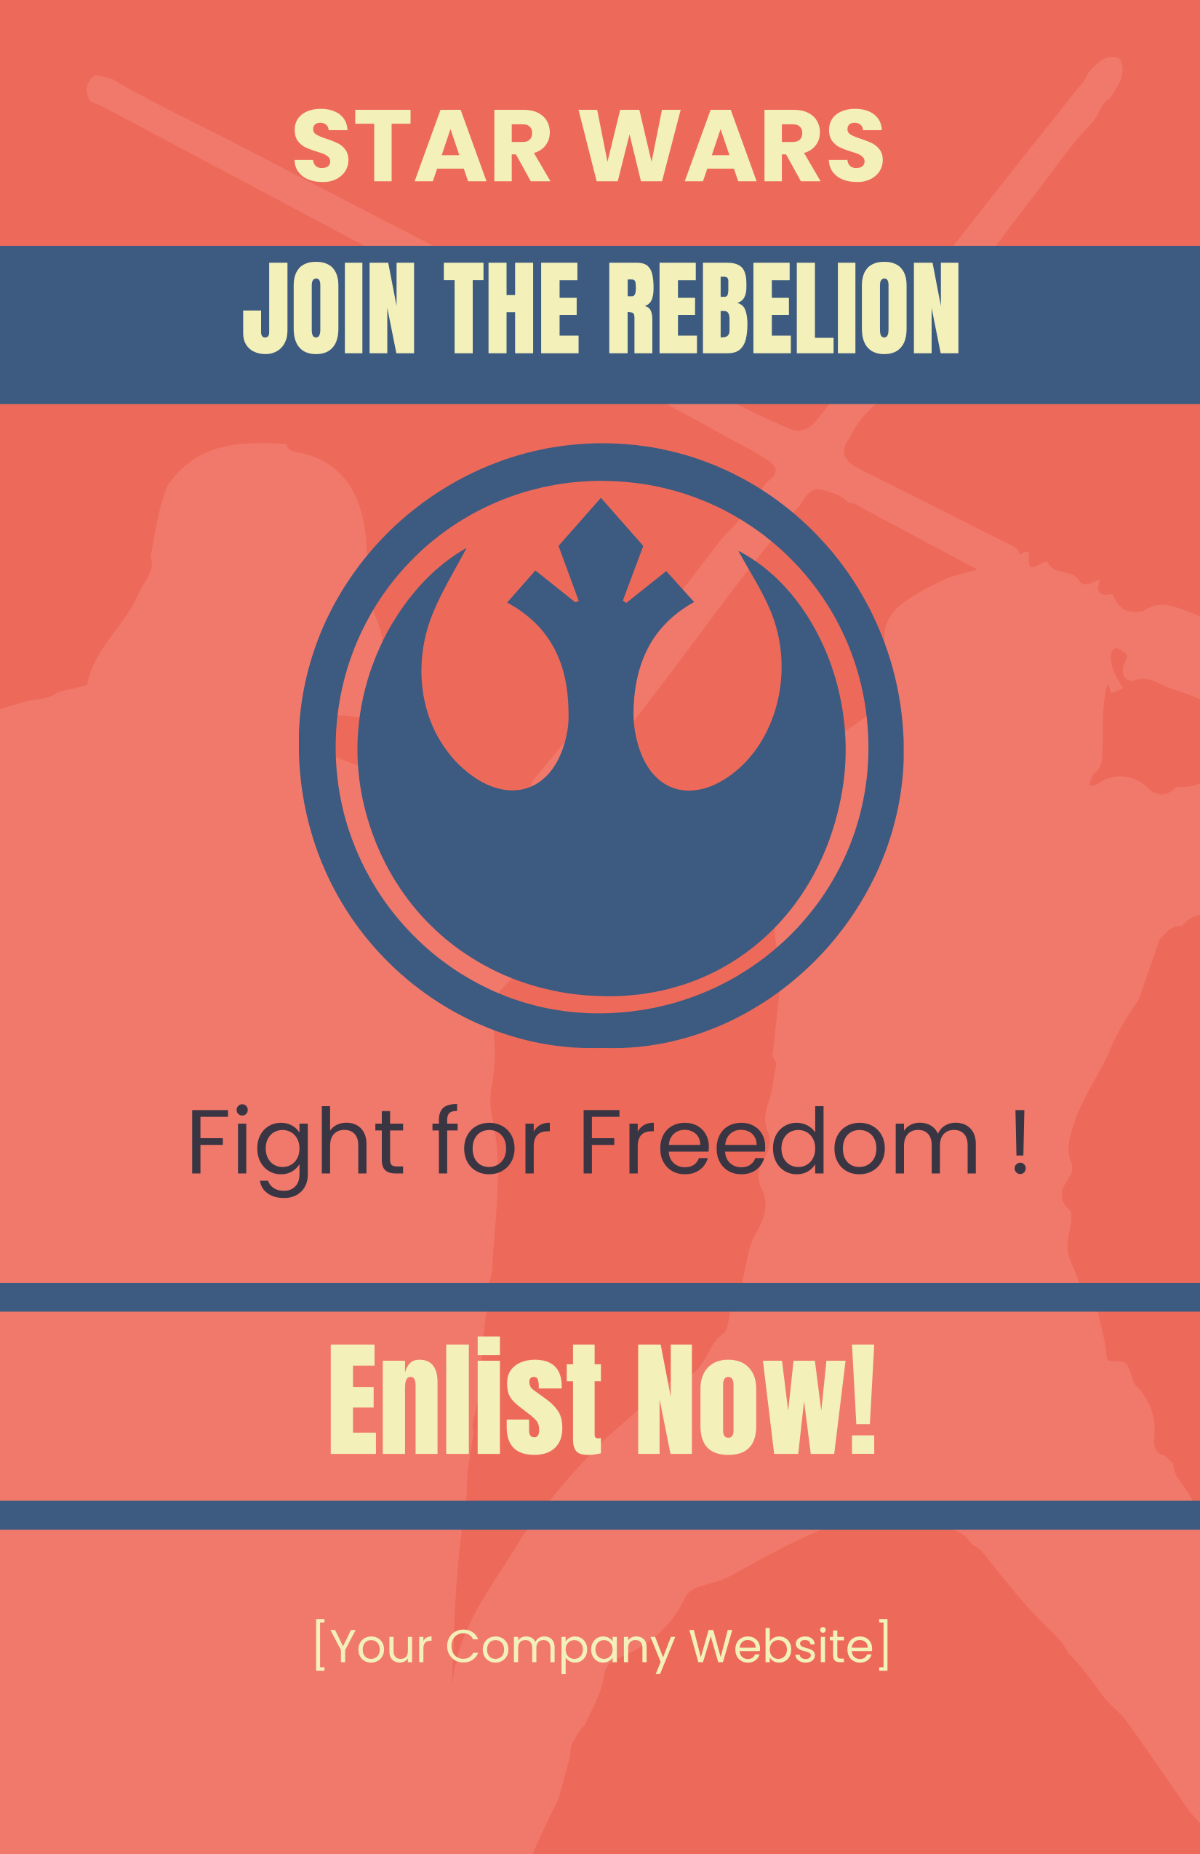 Free Star Wars Classic Poster Template